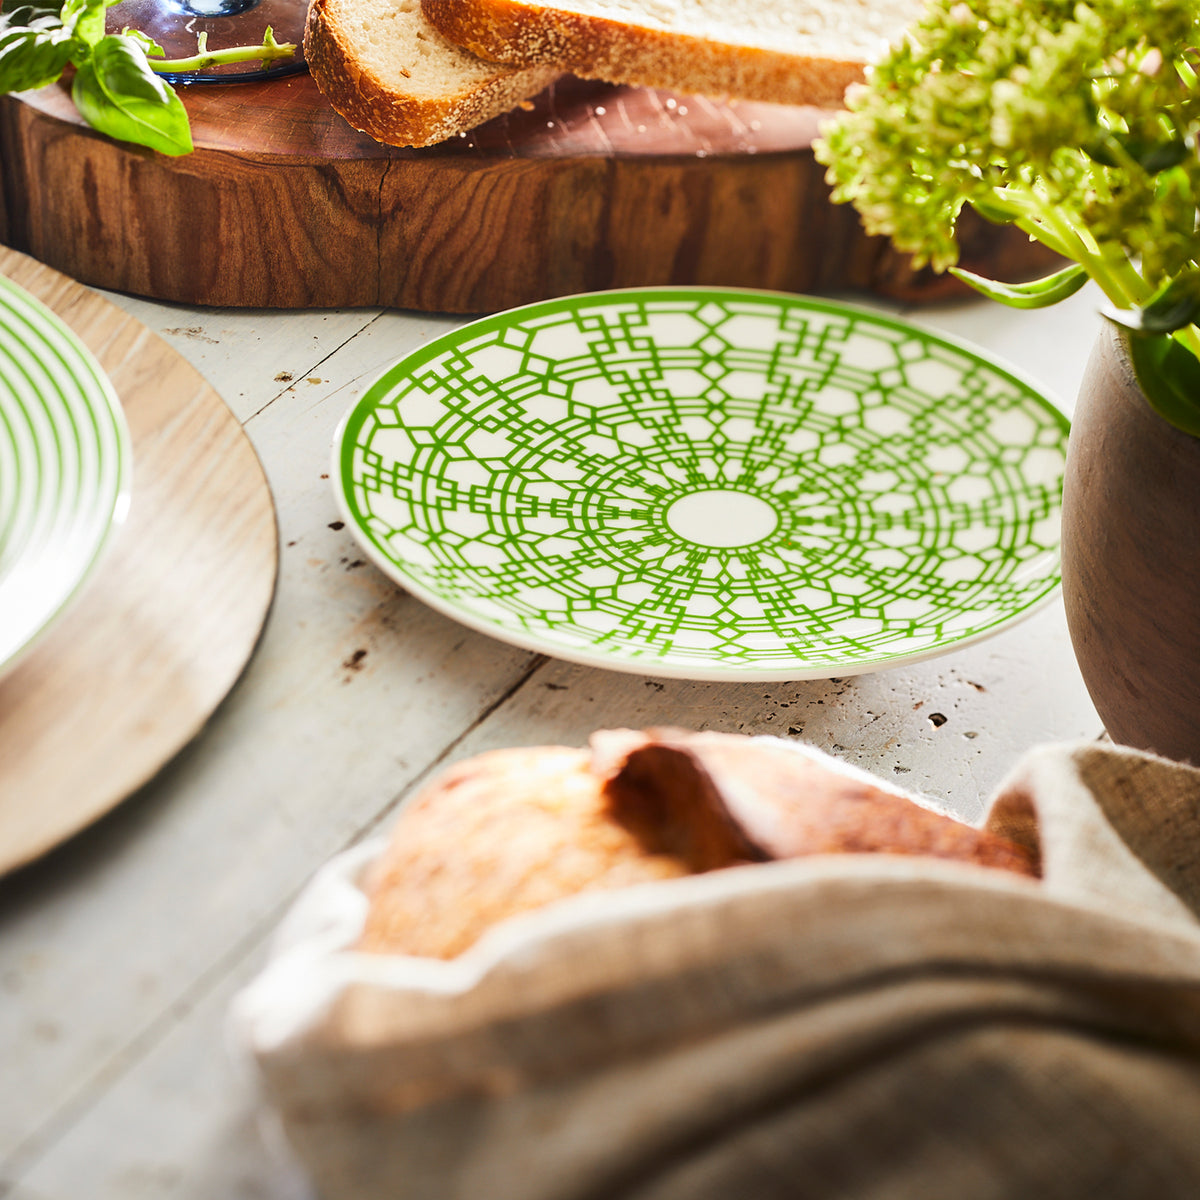 A green and white patterned Newport Verde Small Plate from the Caskata Artisanal Home collection sits on a wooden table next to a loaf of bread, sliced bread, and a pot of green flowers. This heirloom-quality dinnerware adds charm and elegance to any meal.